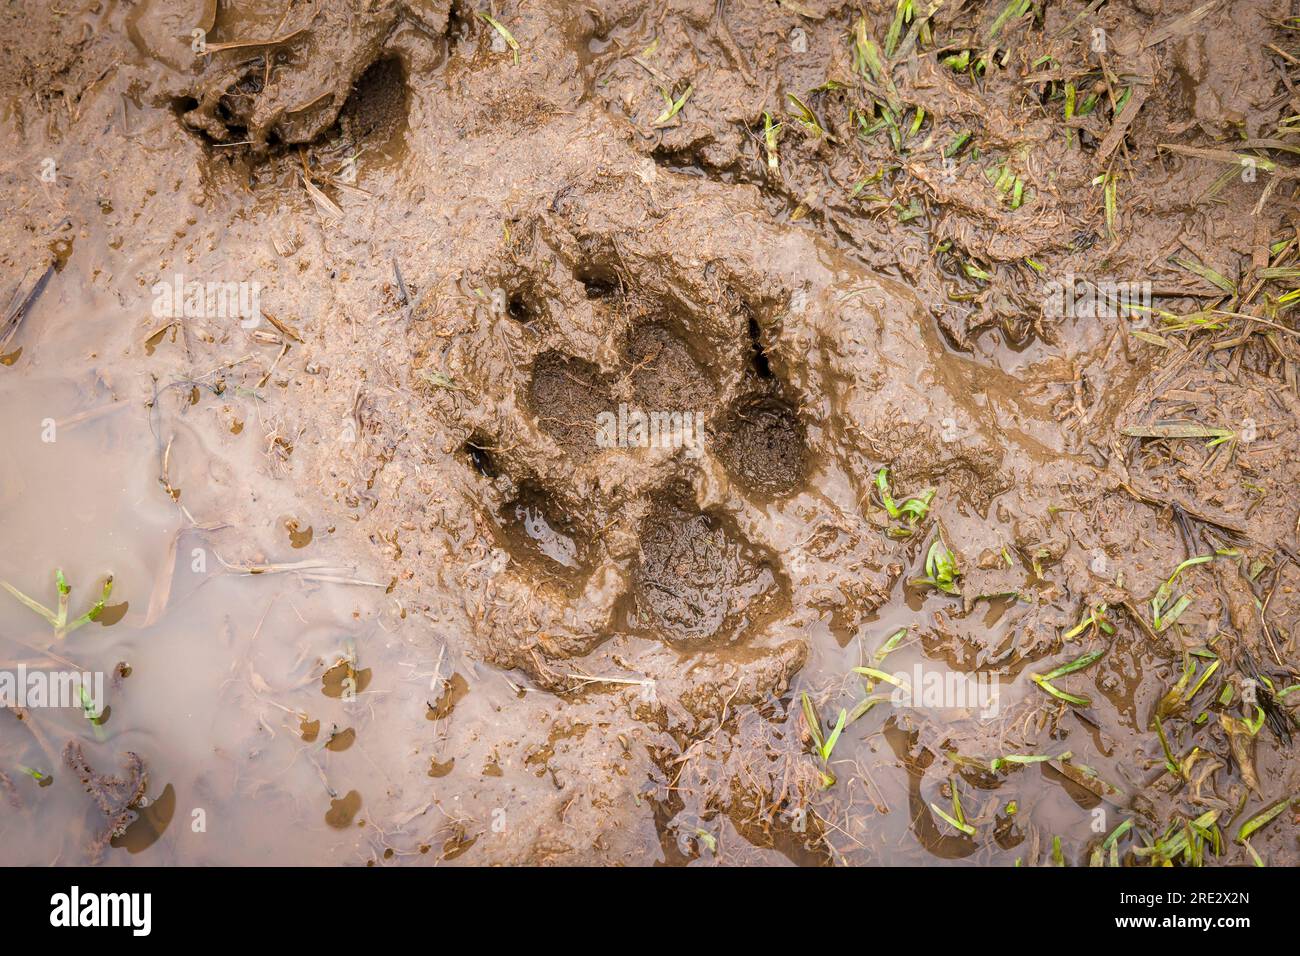 Muddy paw print. Dog paw print in mud on a country path, UK Stock Photo